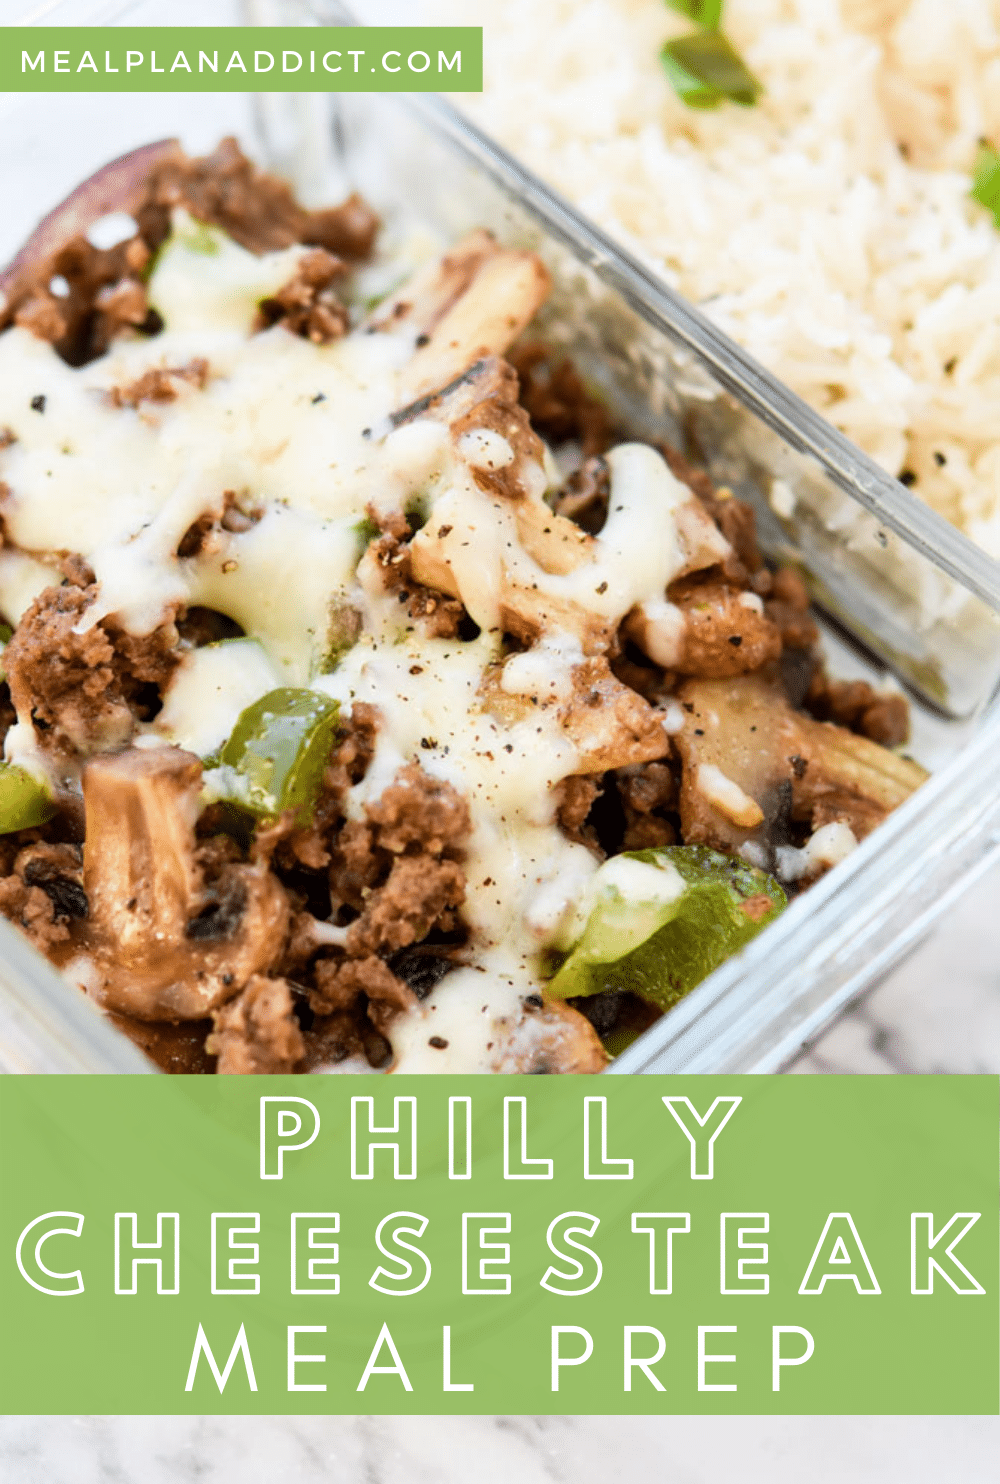 Low Carb Philly Cheesesteak Meal Prep | Meal Plan Addict